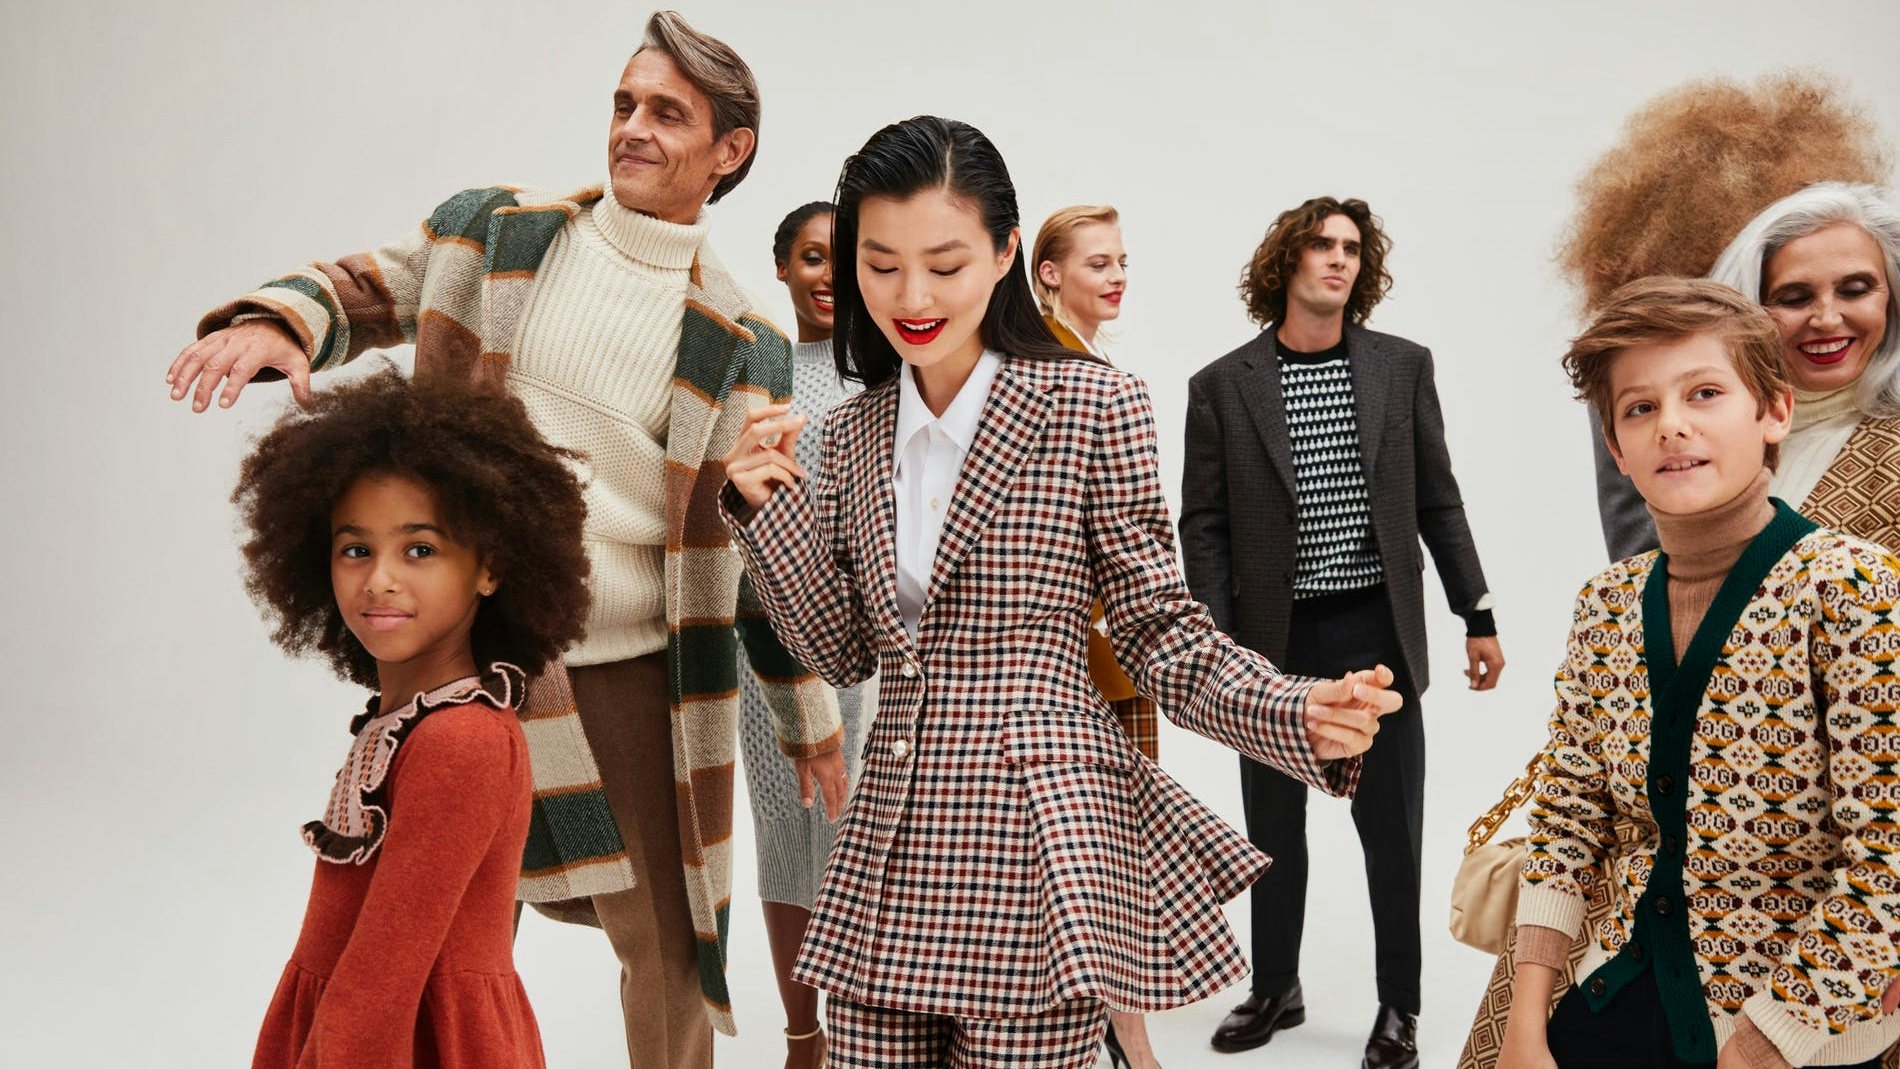 Mytheresa’s net income more than doubled in Q2 thanks to 100,000 first-time buyers, bringing its active customers to over half a million. Photo: Courtesy of Mytheresa